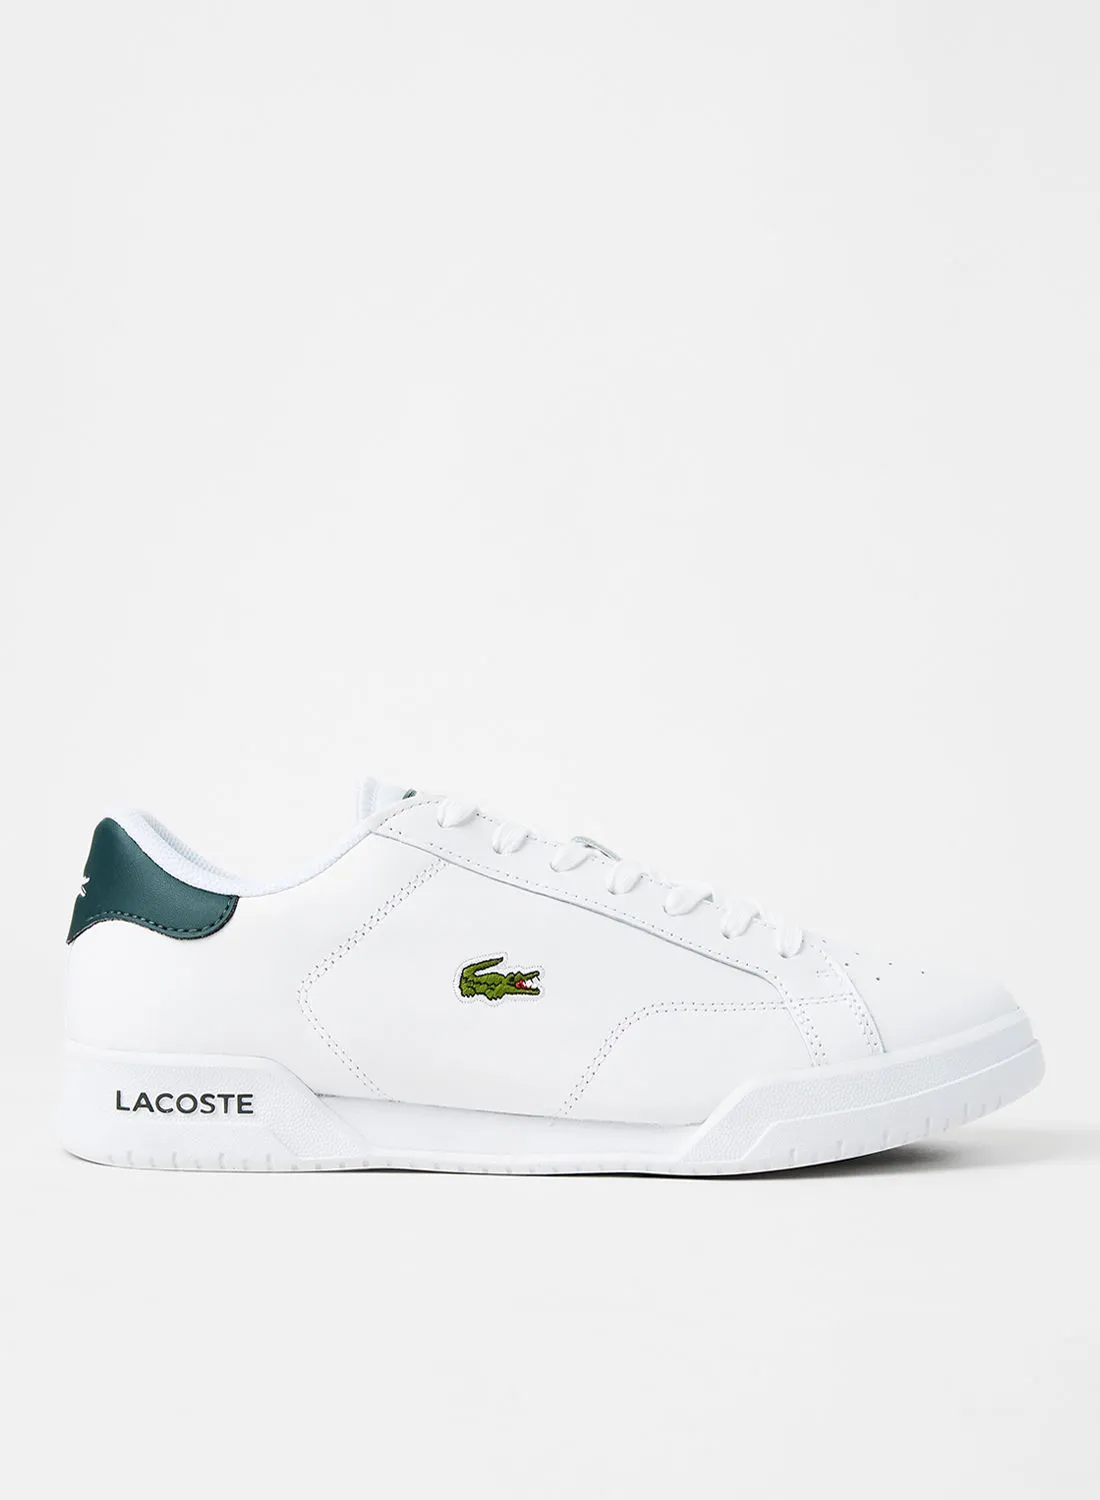 LACOSTE Twin Serve Leather Sneakers White/Dark Green